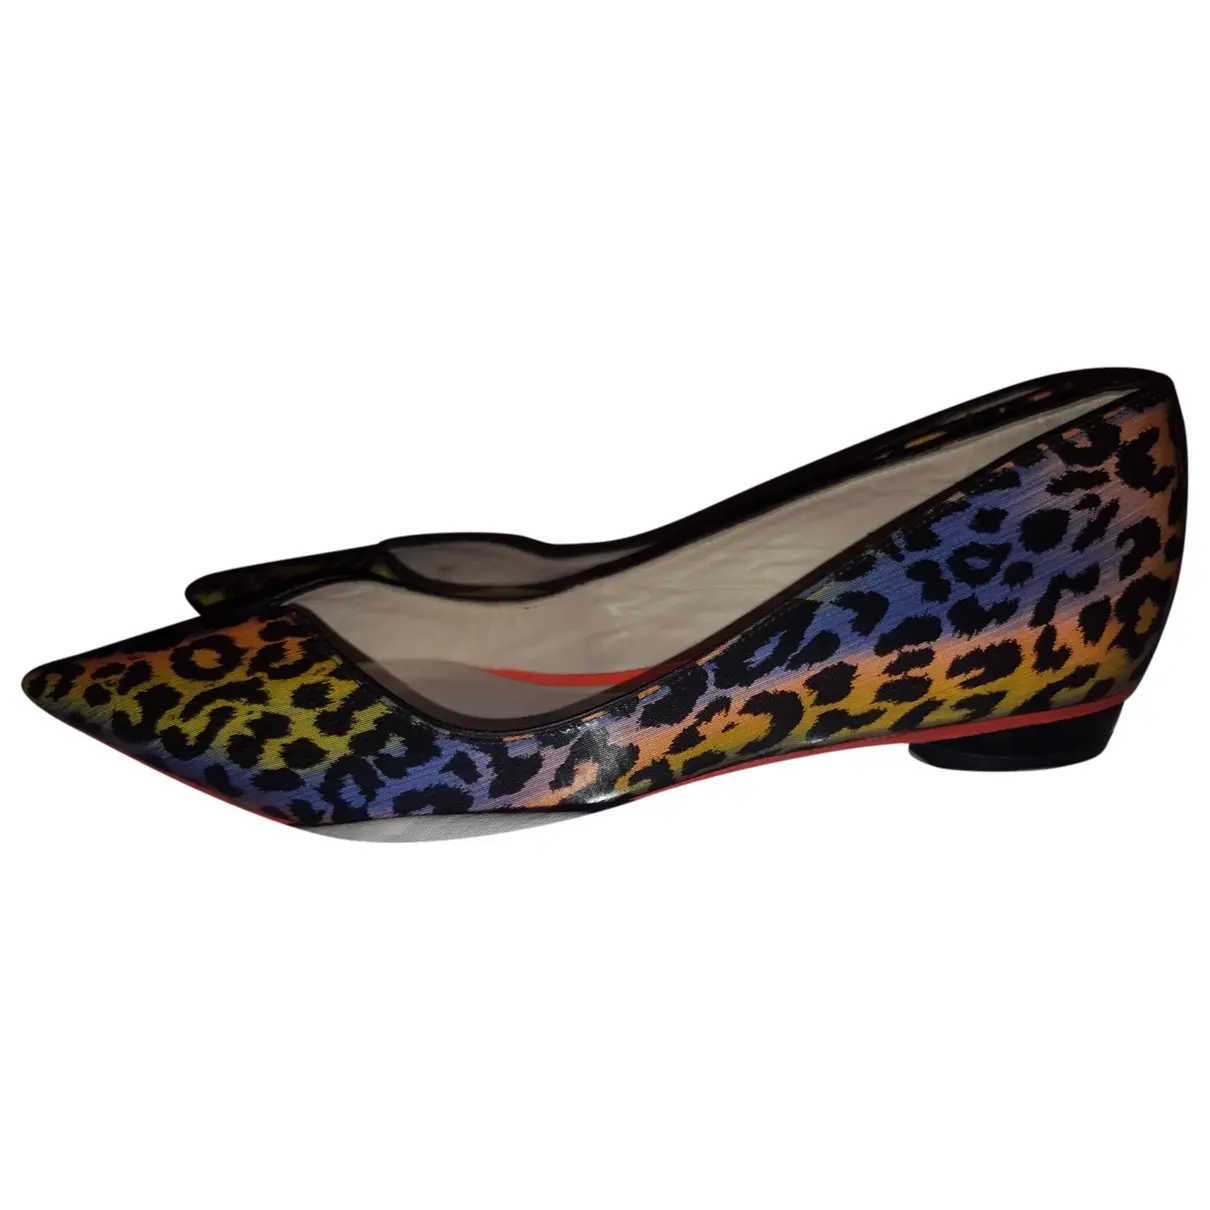 Patent leather flats Sophia Webster